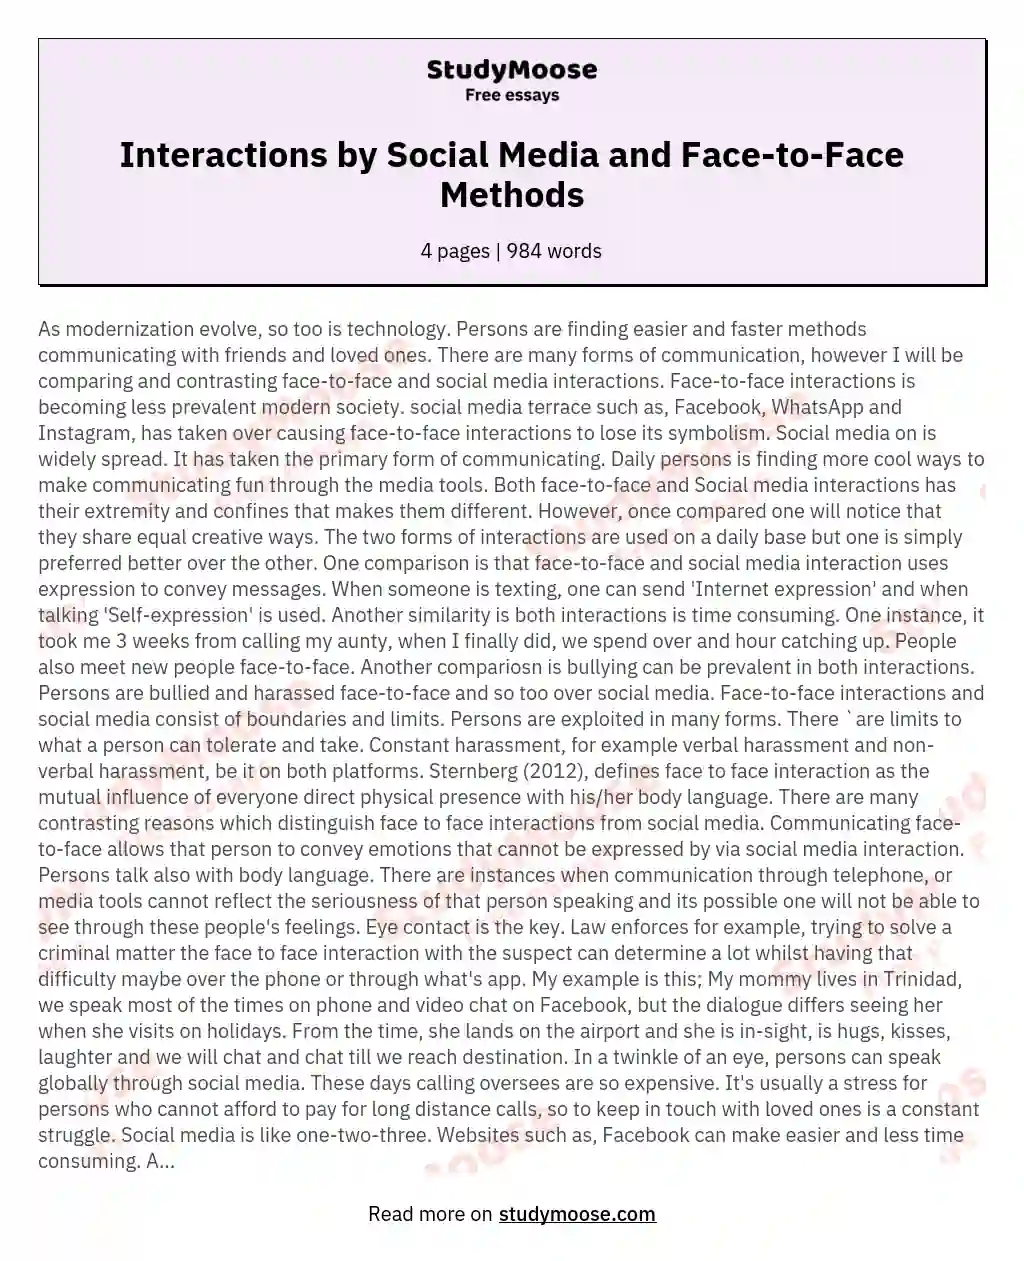 Interactions by Social Media and Face-to-Face Methods